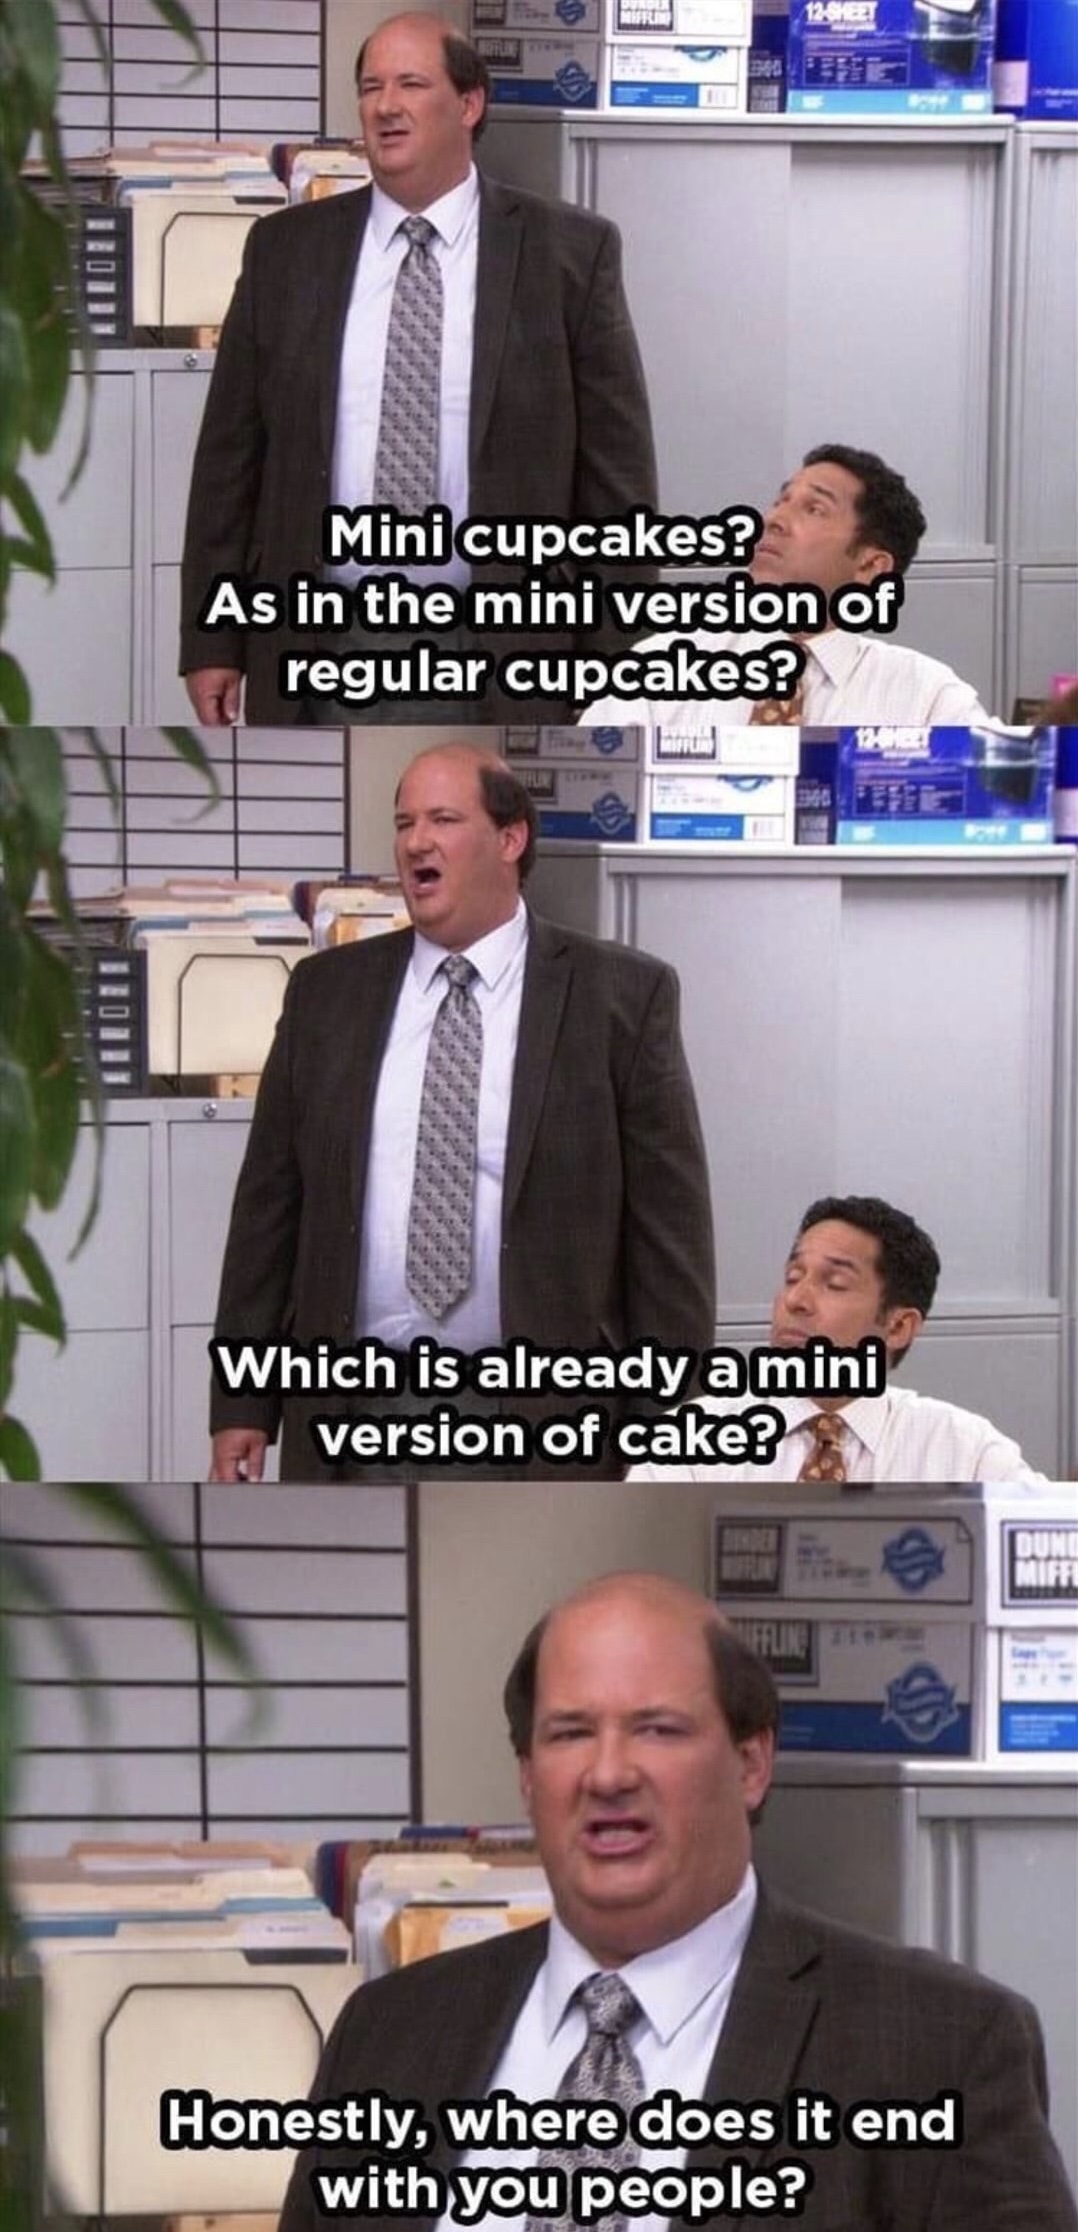 memes - funny underrated memes - Mini cupcakes? As in the mini version of regular cupcakes? Which is already a mini version of cake? Honestly, where does it end with you people?